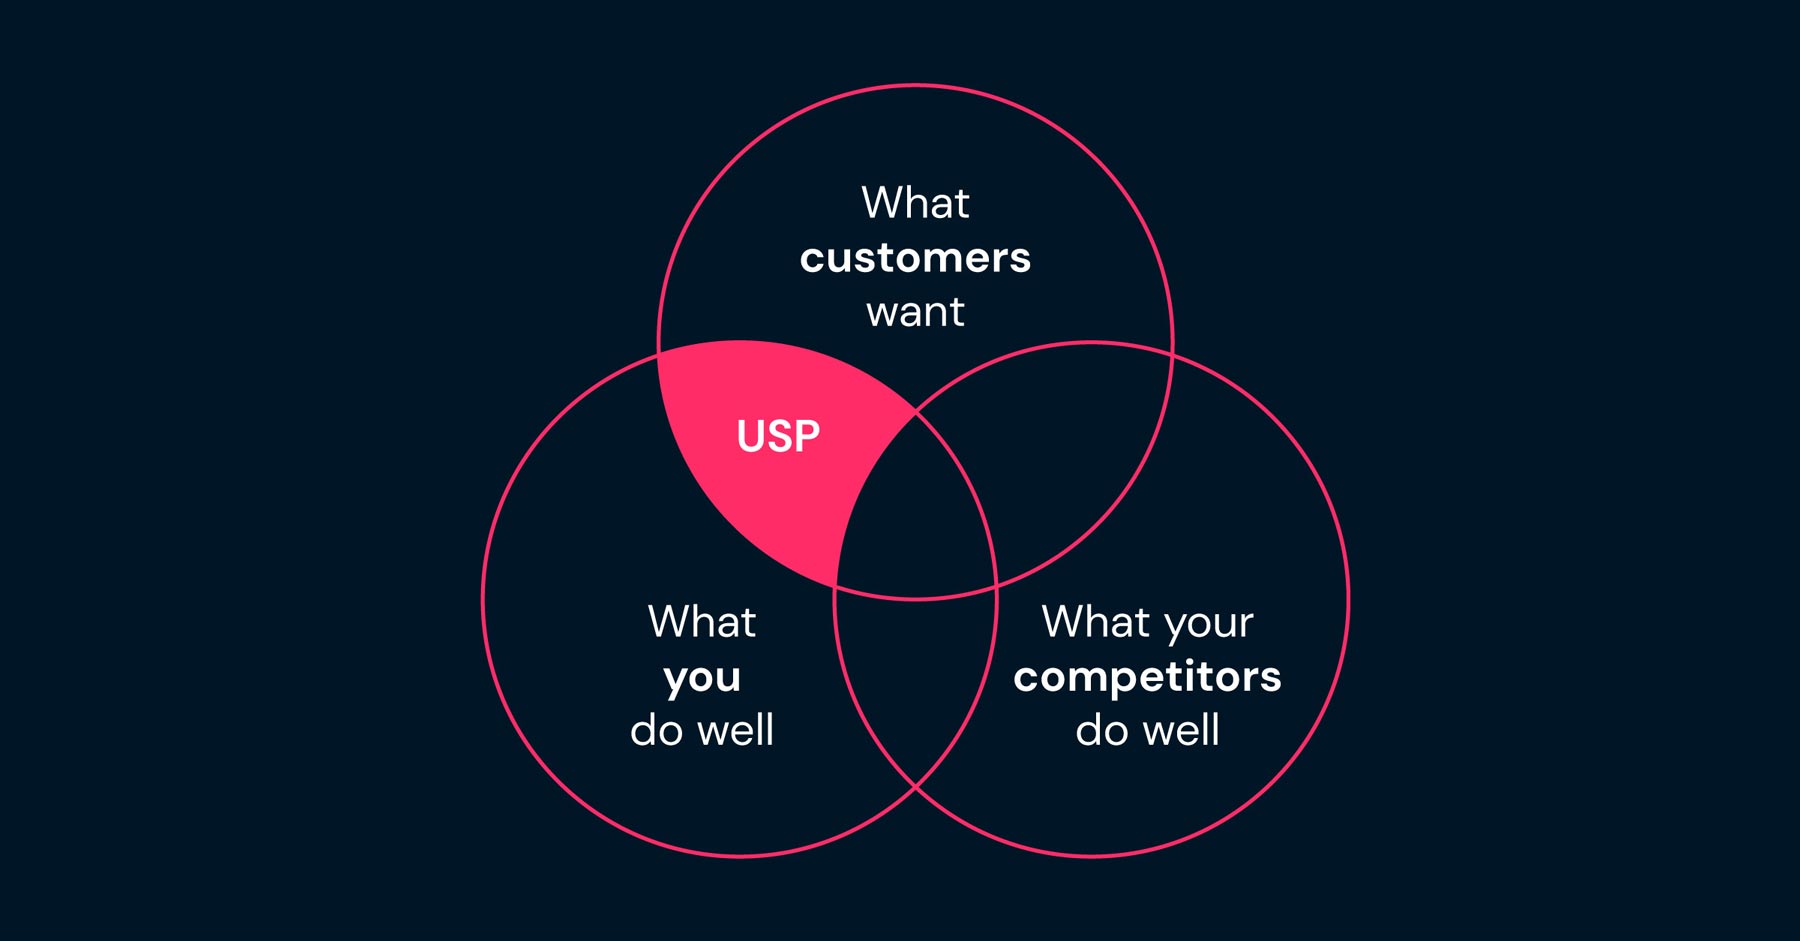 What is a Unique Selling Point (USP)?